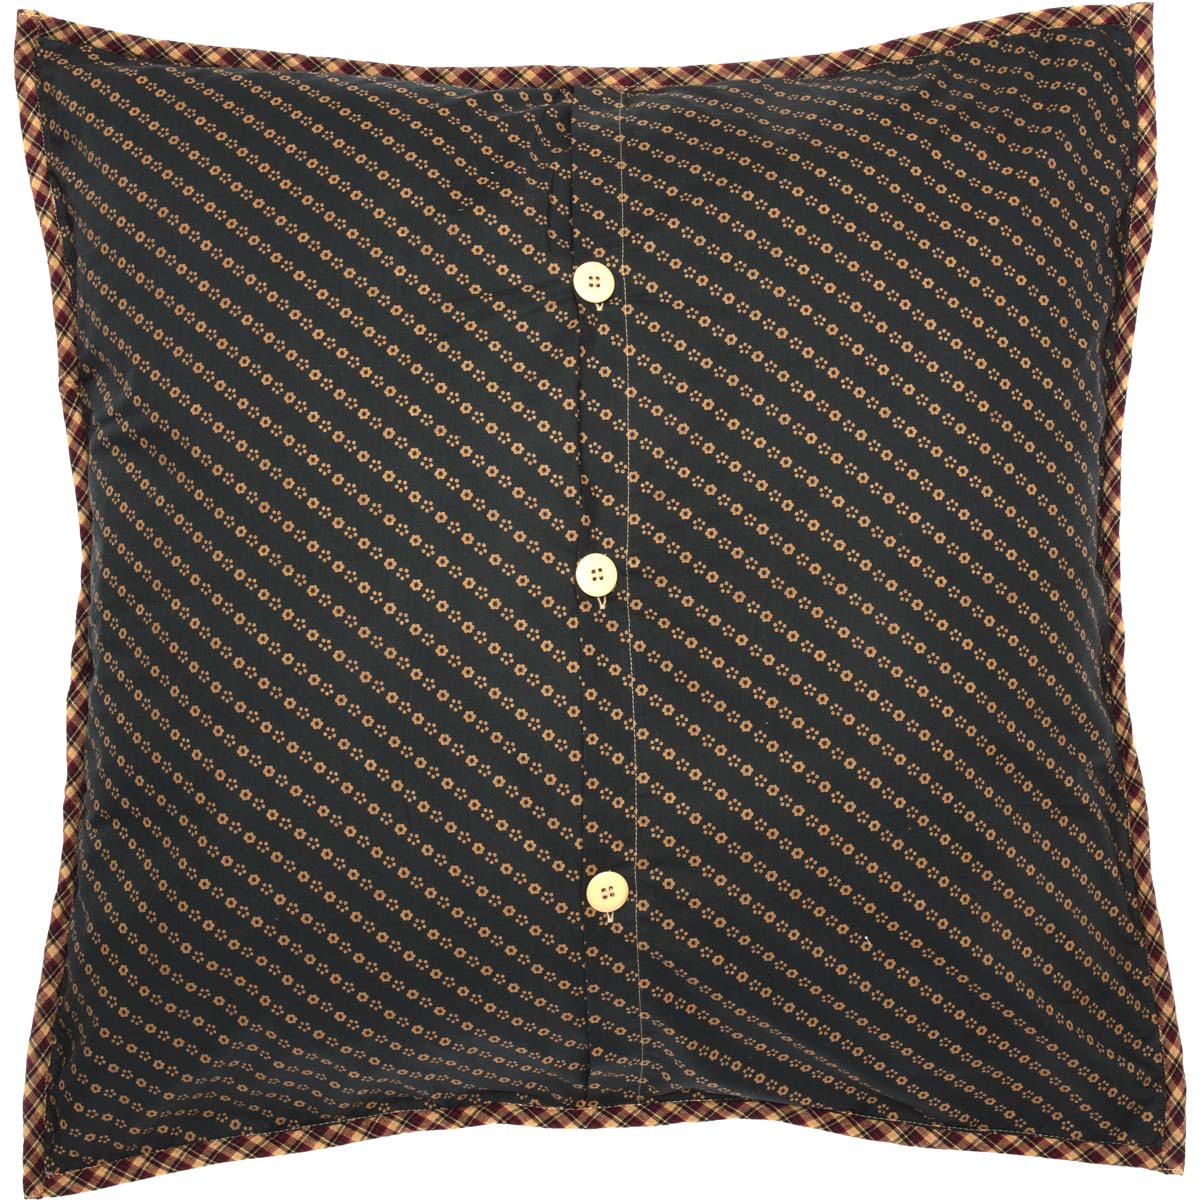 Patriotic Patch Euro Sham Quilted 26x26